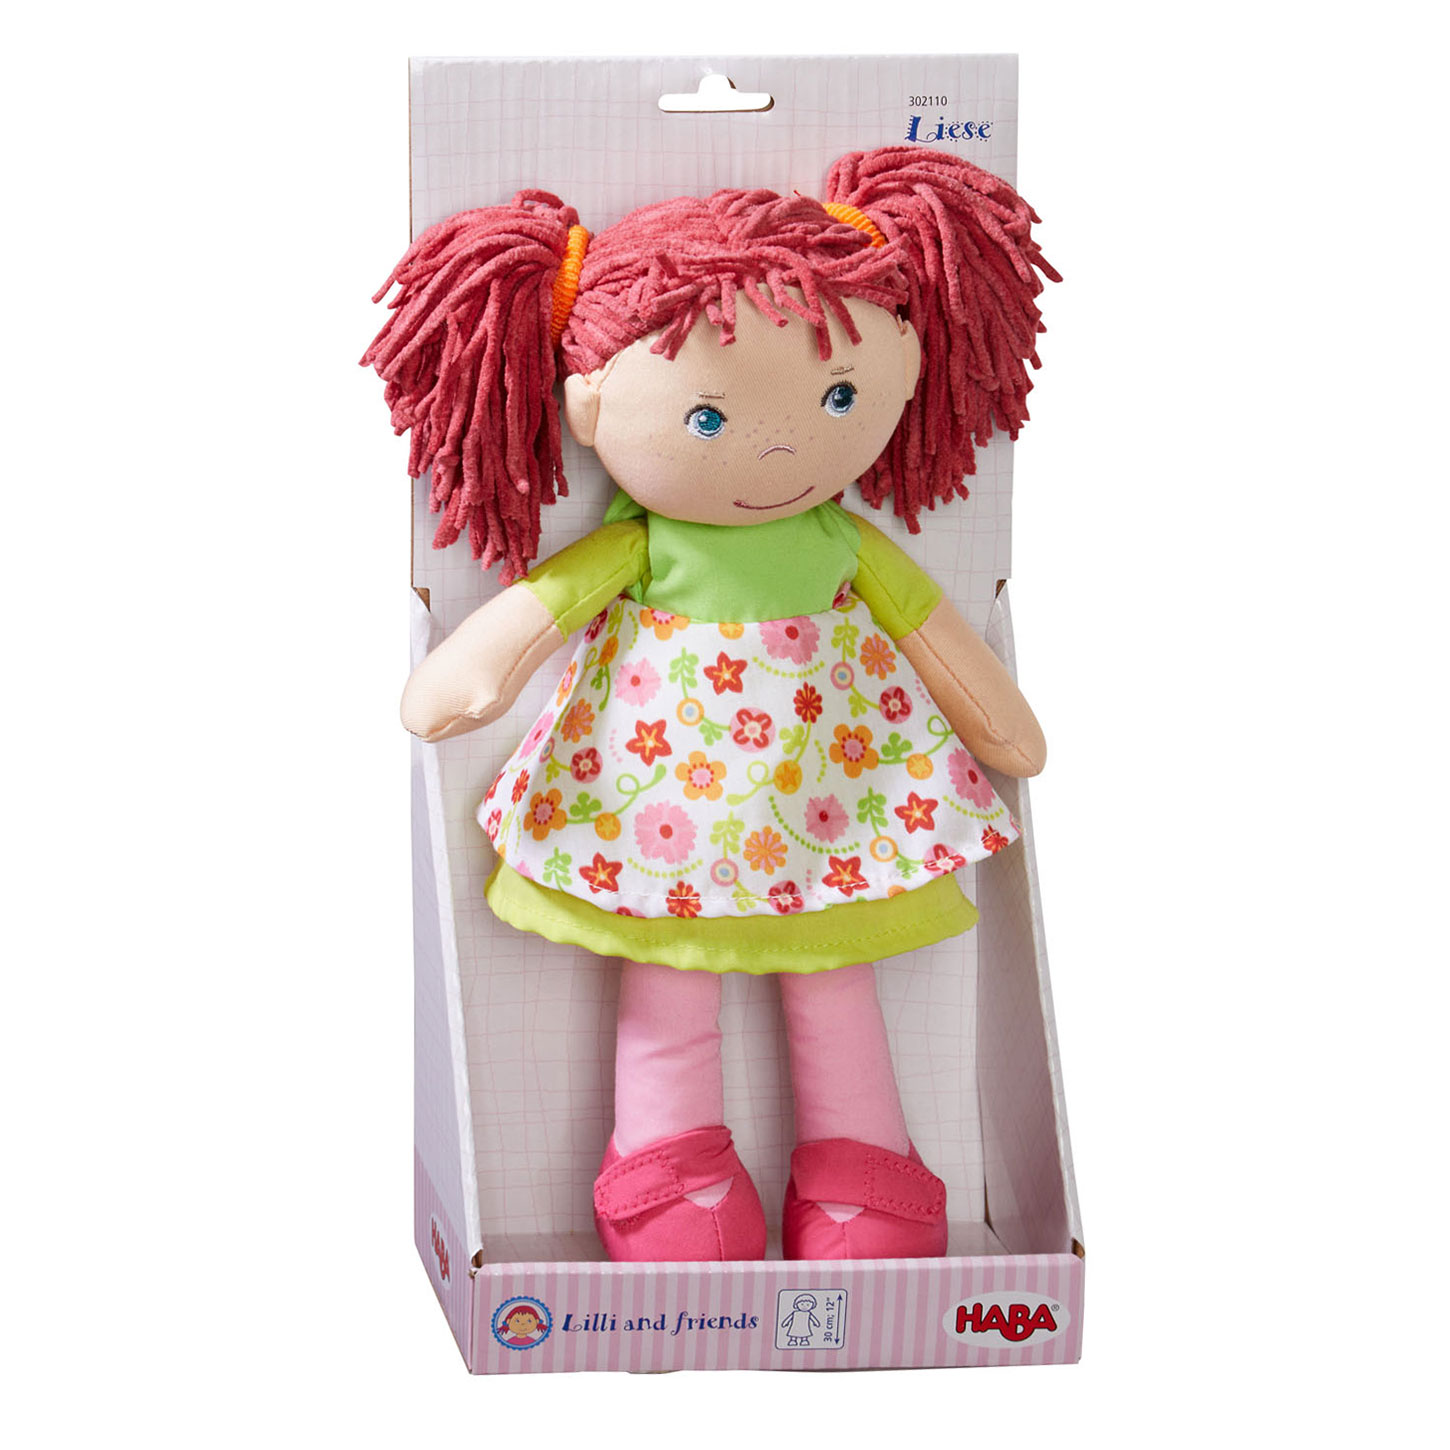 Haba Stoffpuppe Liese, 30cm